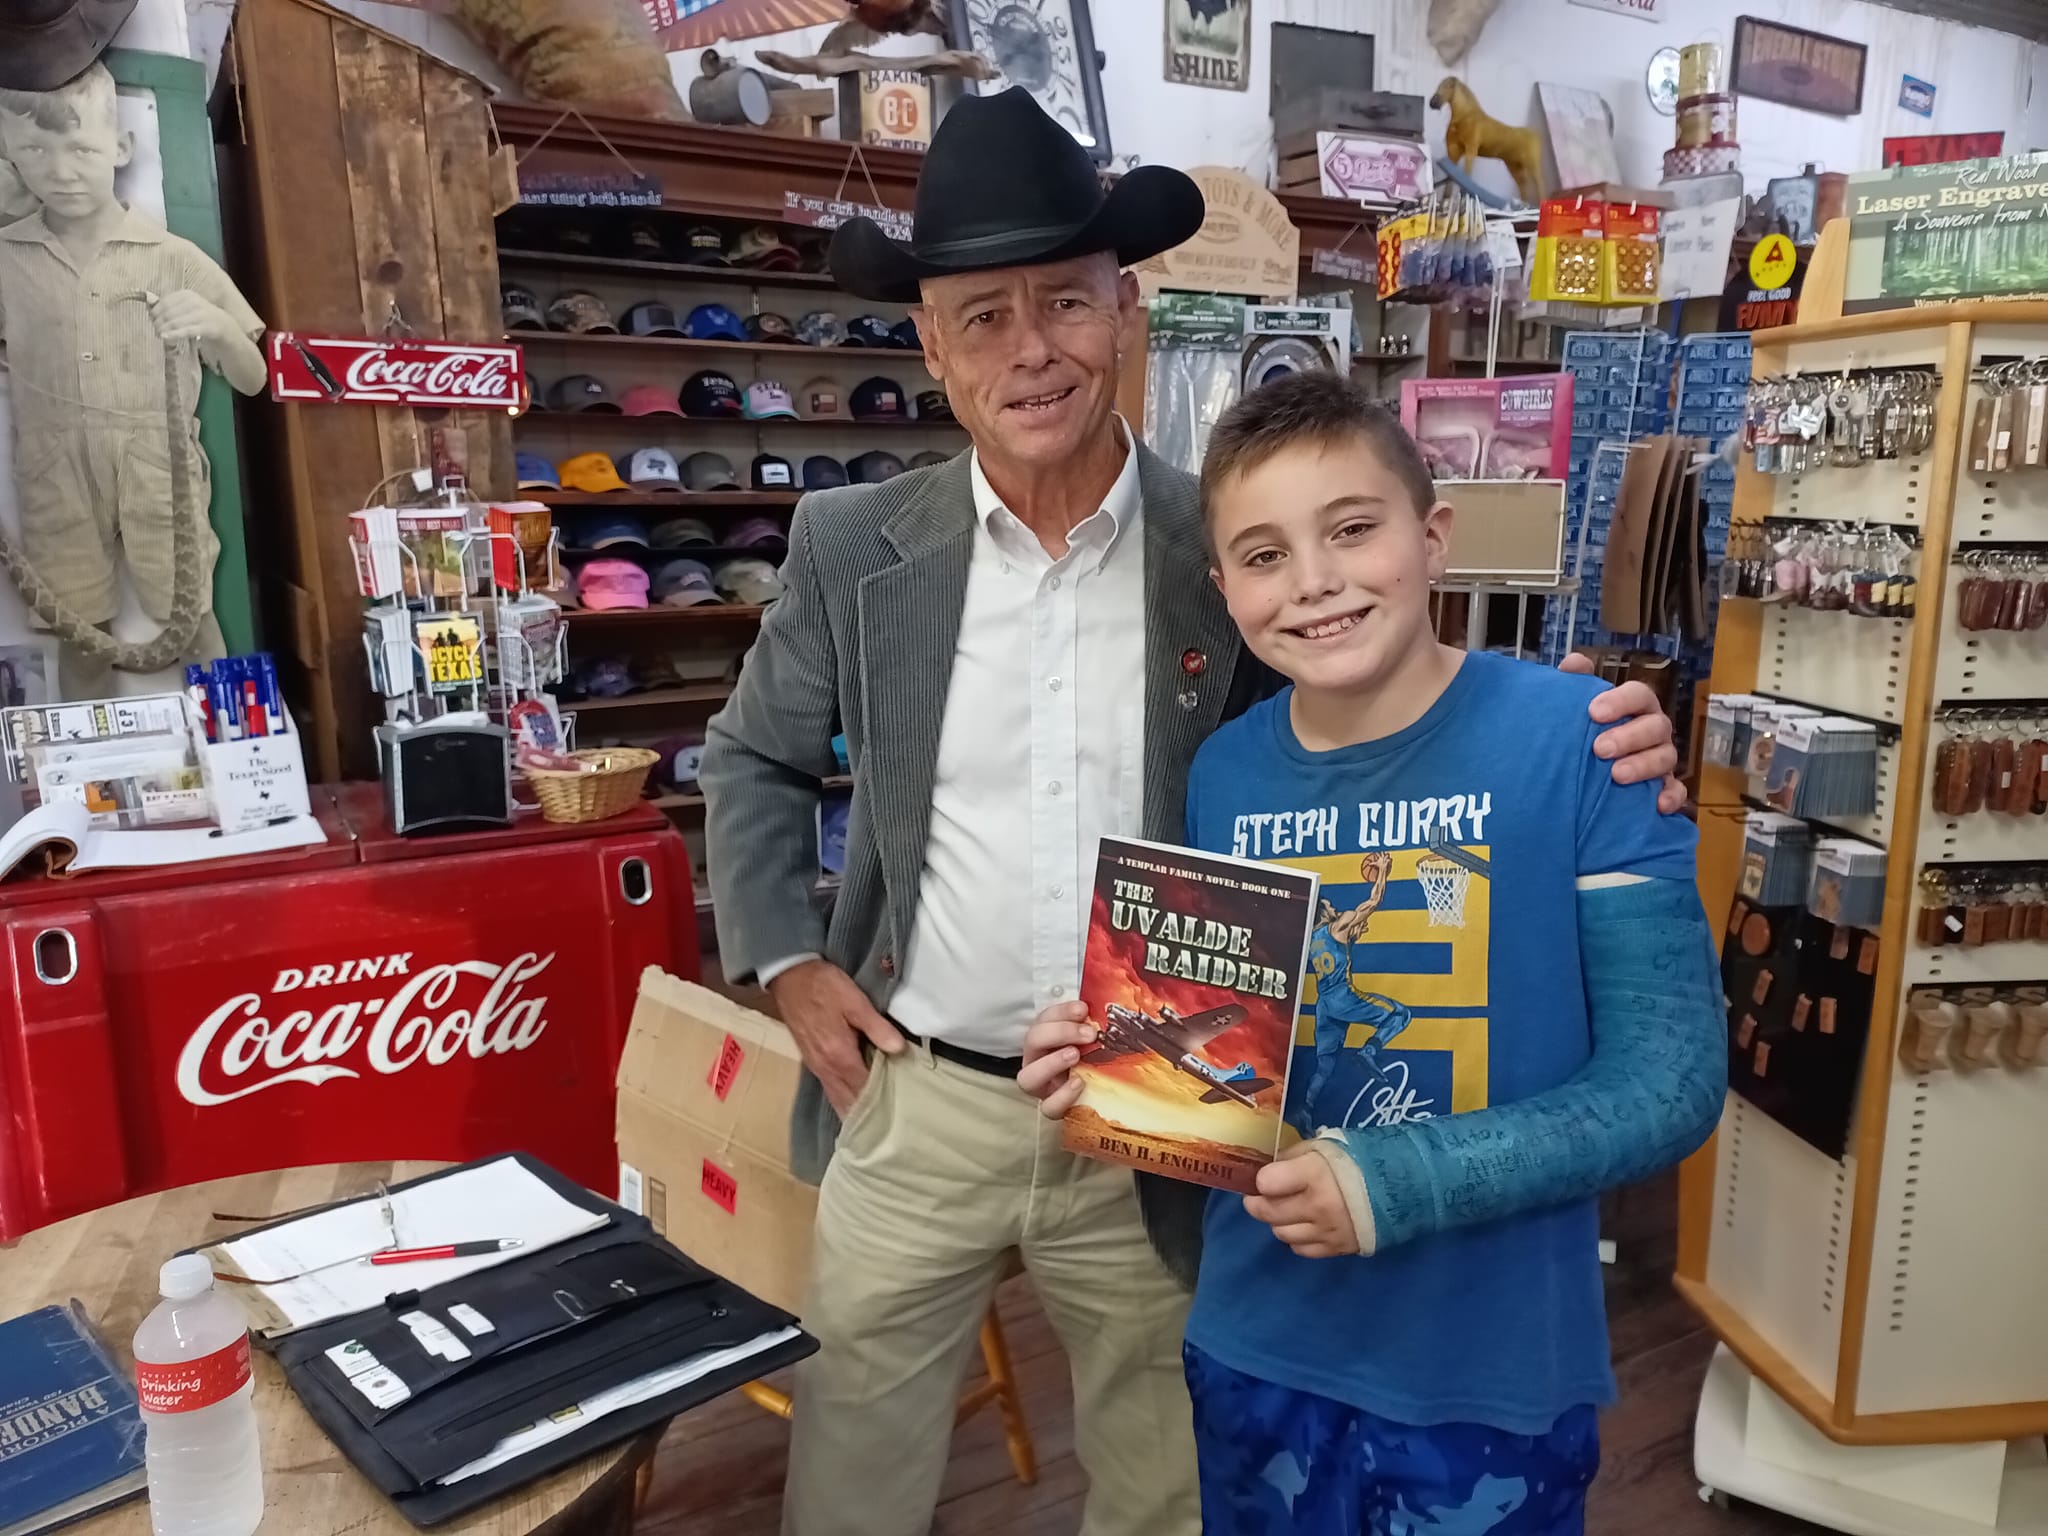 Author Ben H. English stands with young reader who just purchased a copy of Uvalde Raider